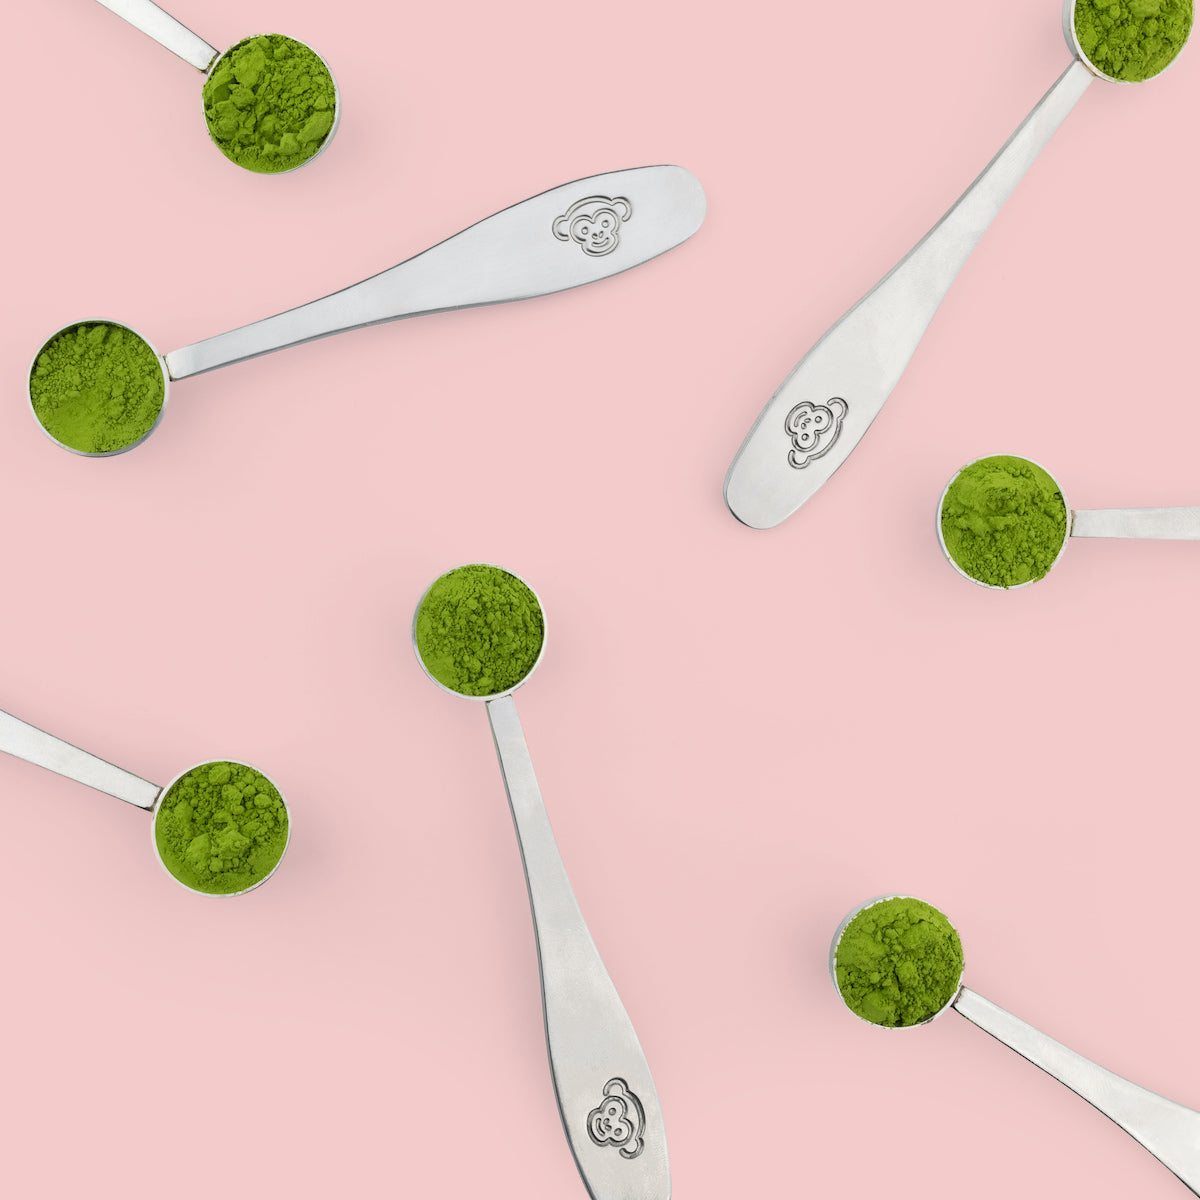 Serving spoons filled with matcha powder from PureChimp.